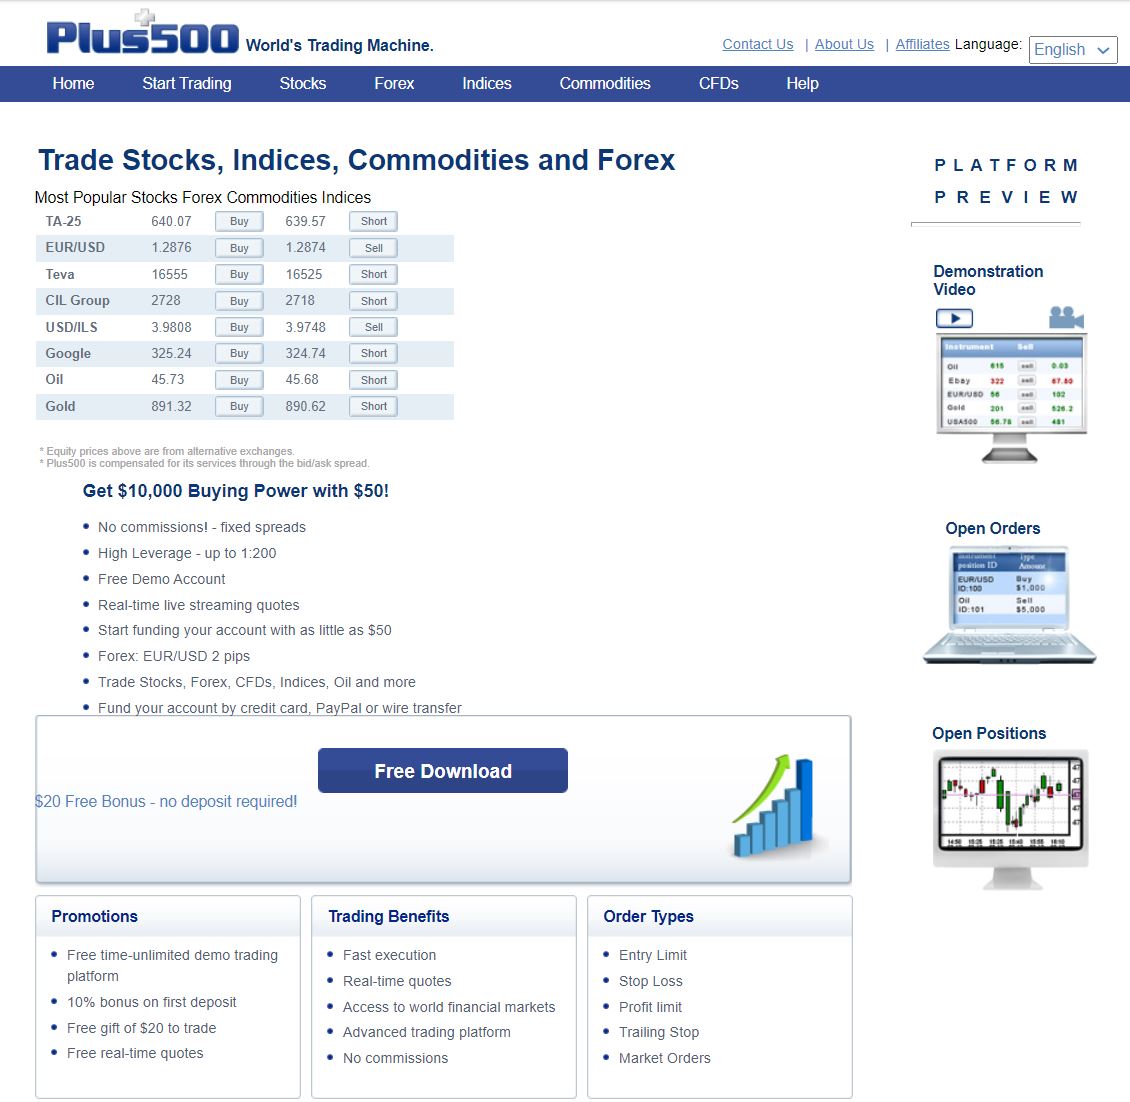 The Plus500 Business Model – How Does Plus500 Make Money?